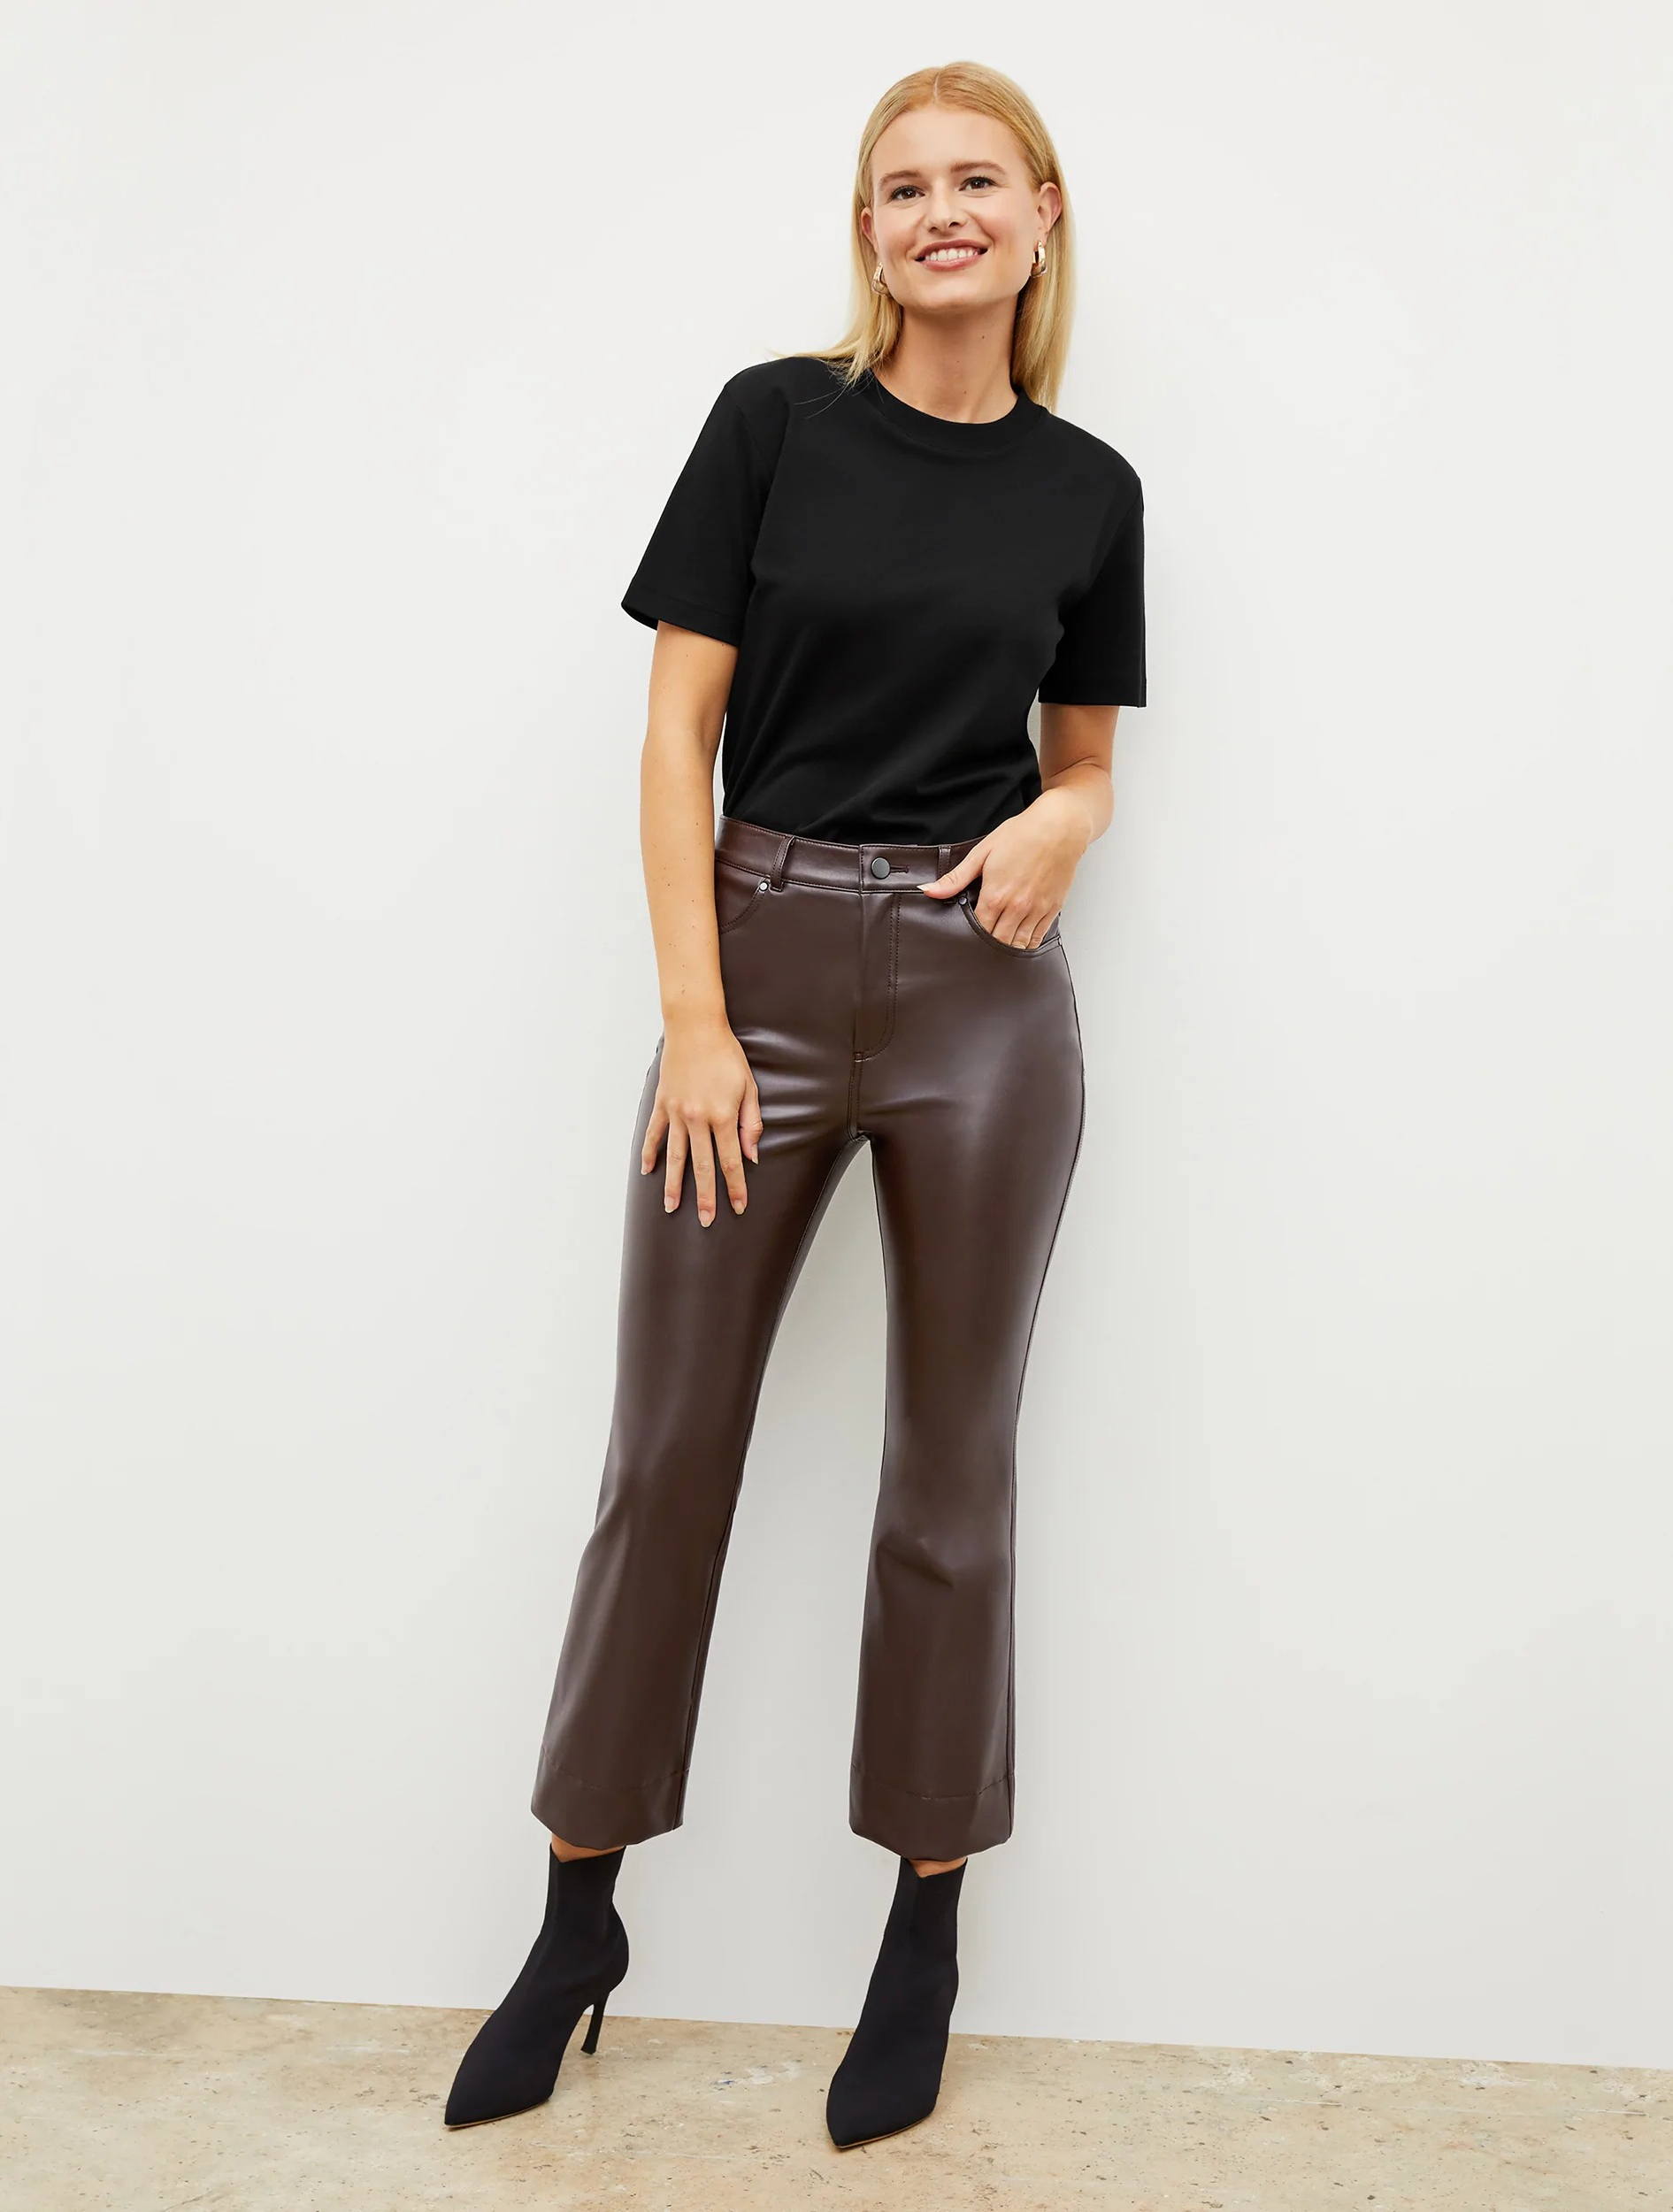 The 20 Best Pairs of Leather Pants for Night & Day